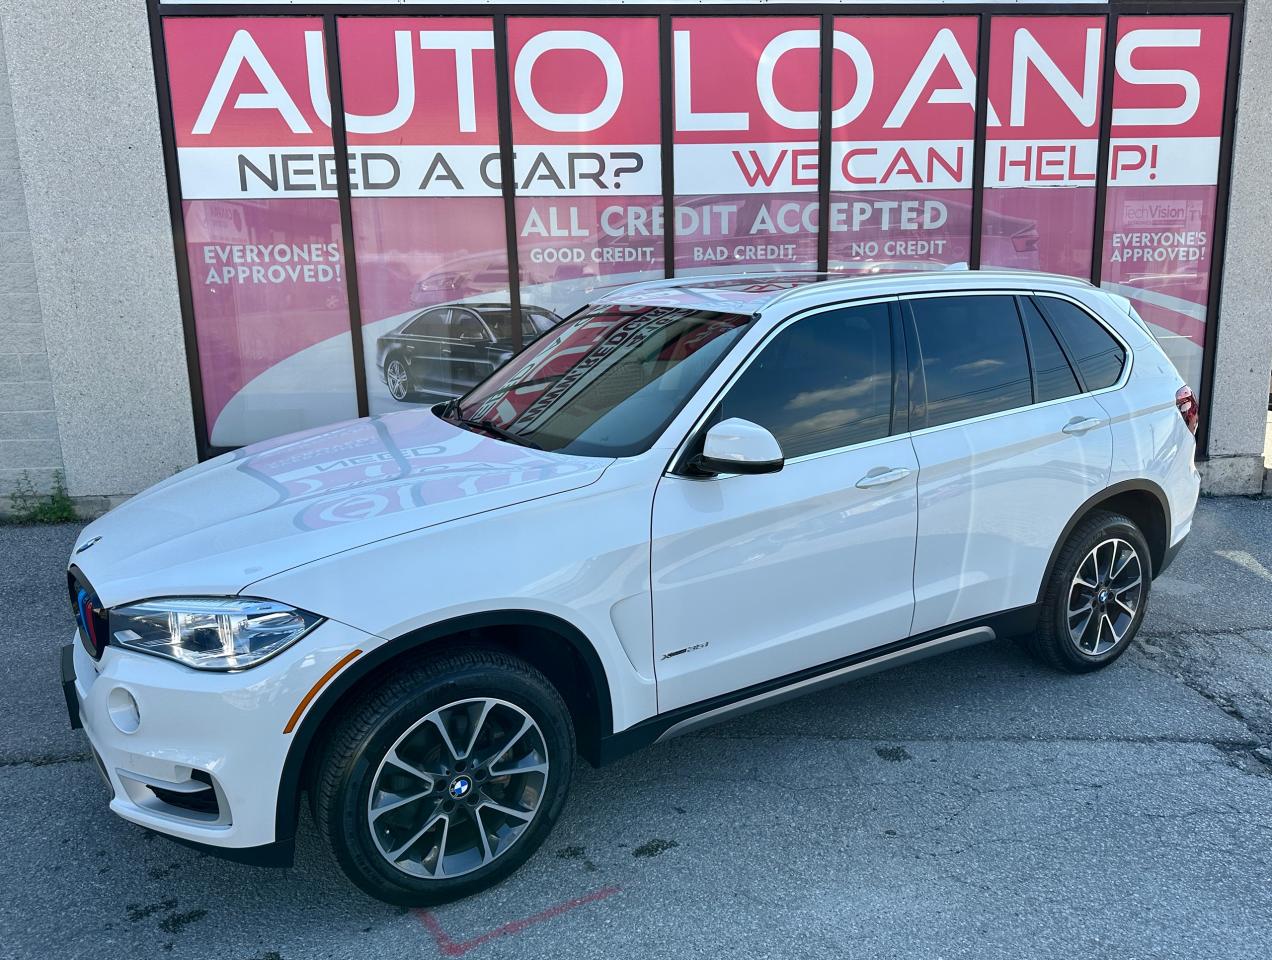 2018 BMW X5 xDrive35i ALL CREDIT ACCEPTED